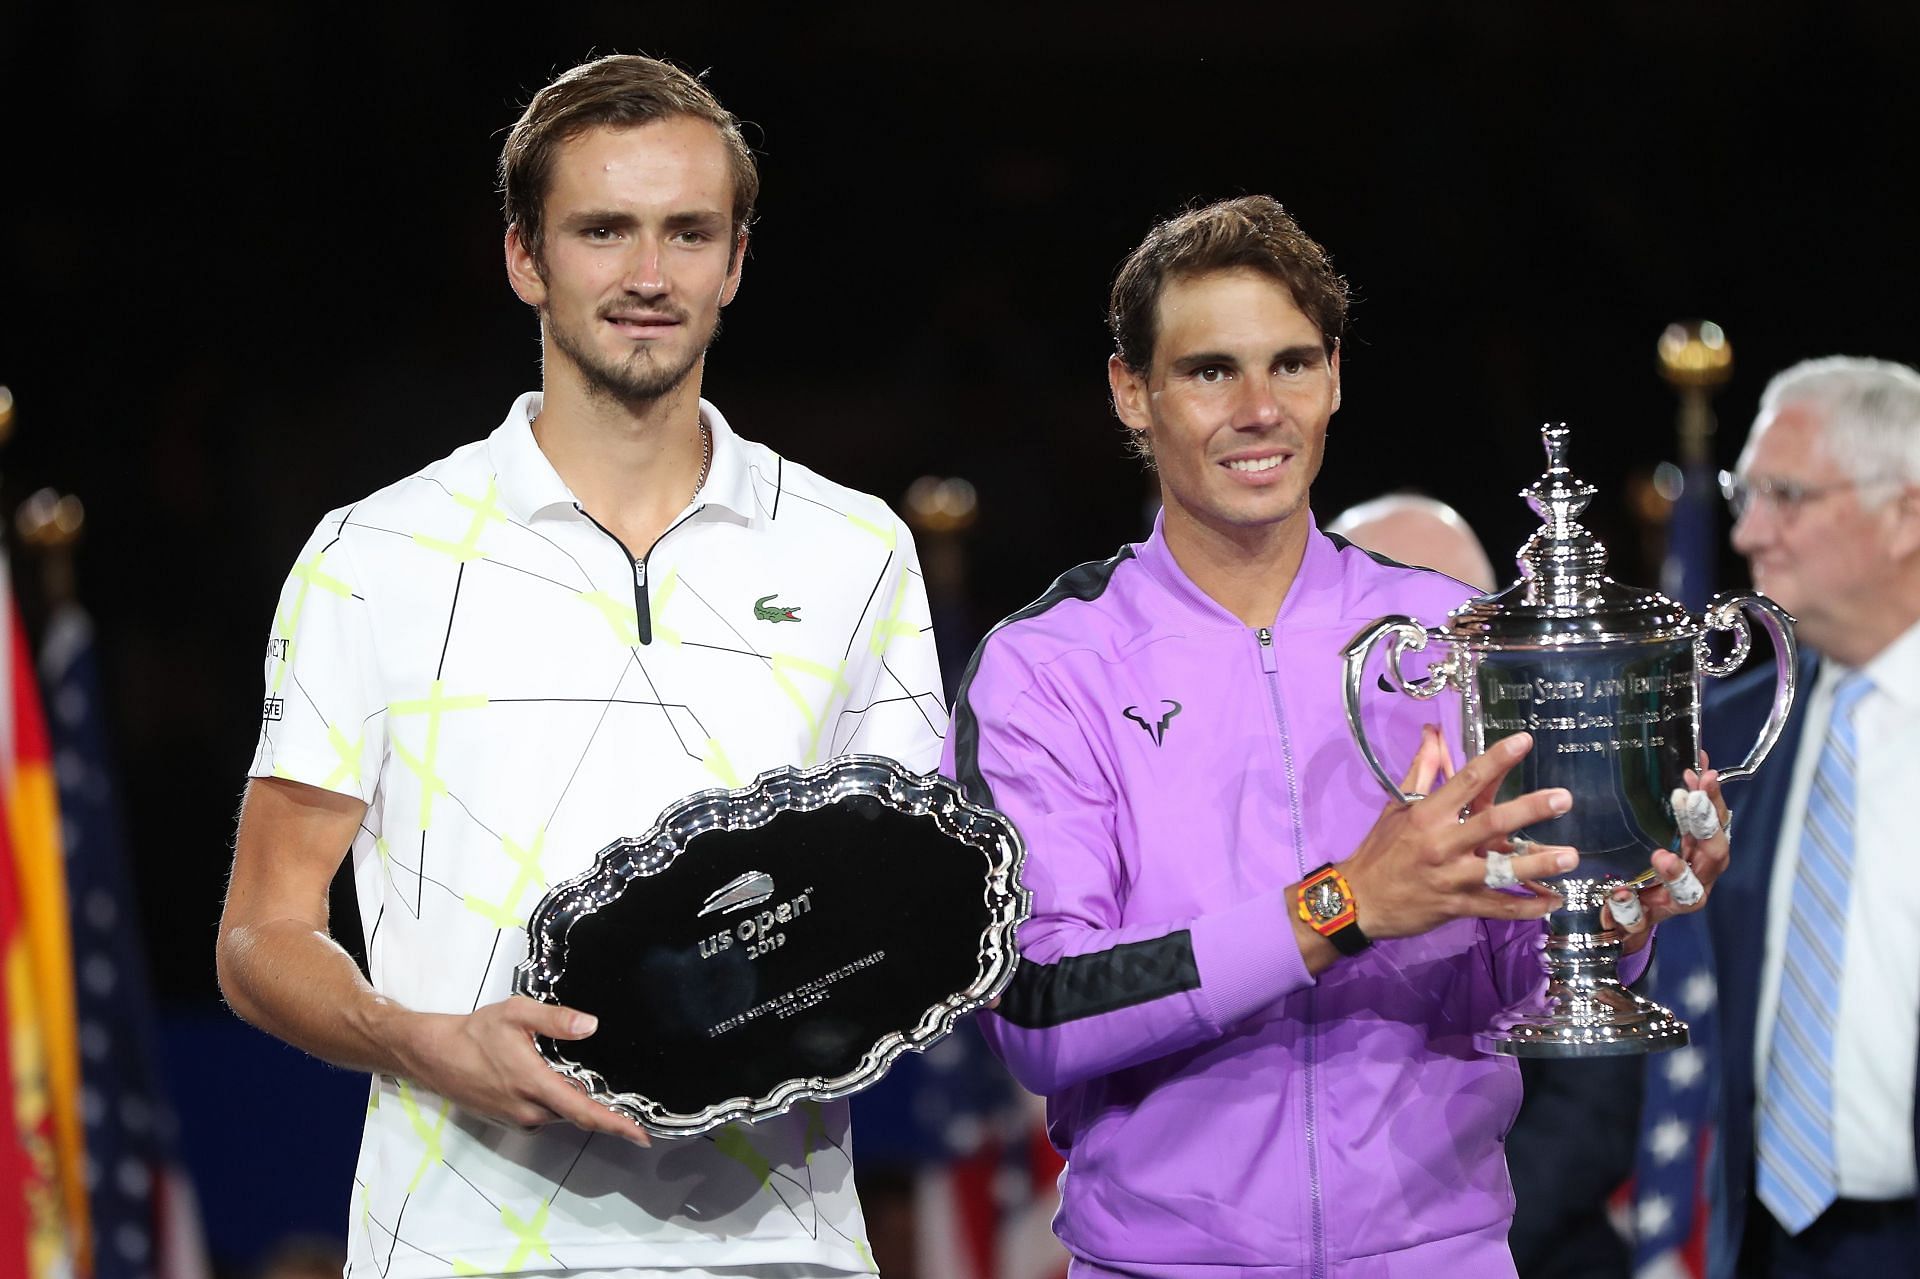 Medvedev (left) fell to Nadal in his first Major final at the US Open in 2019.